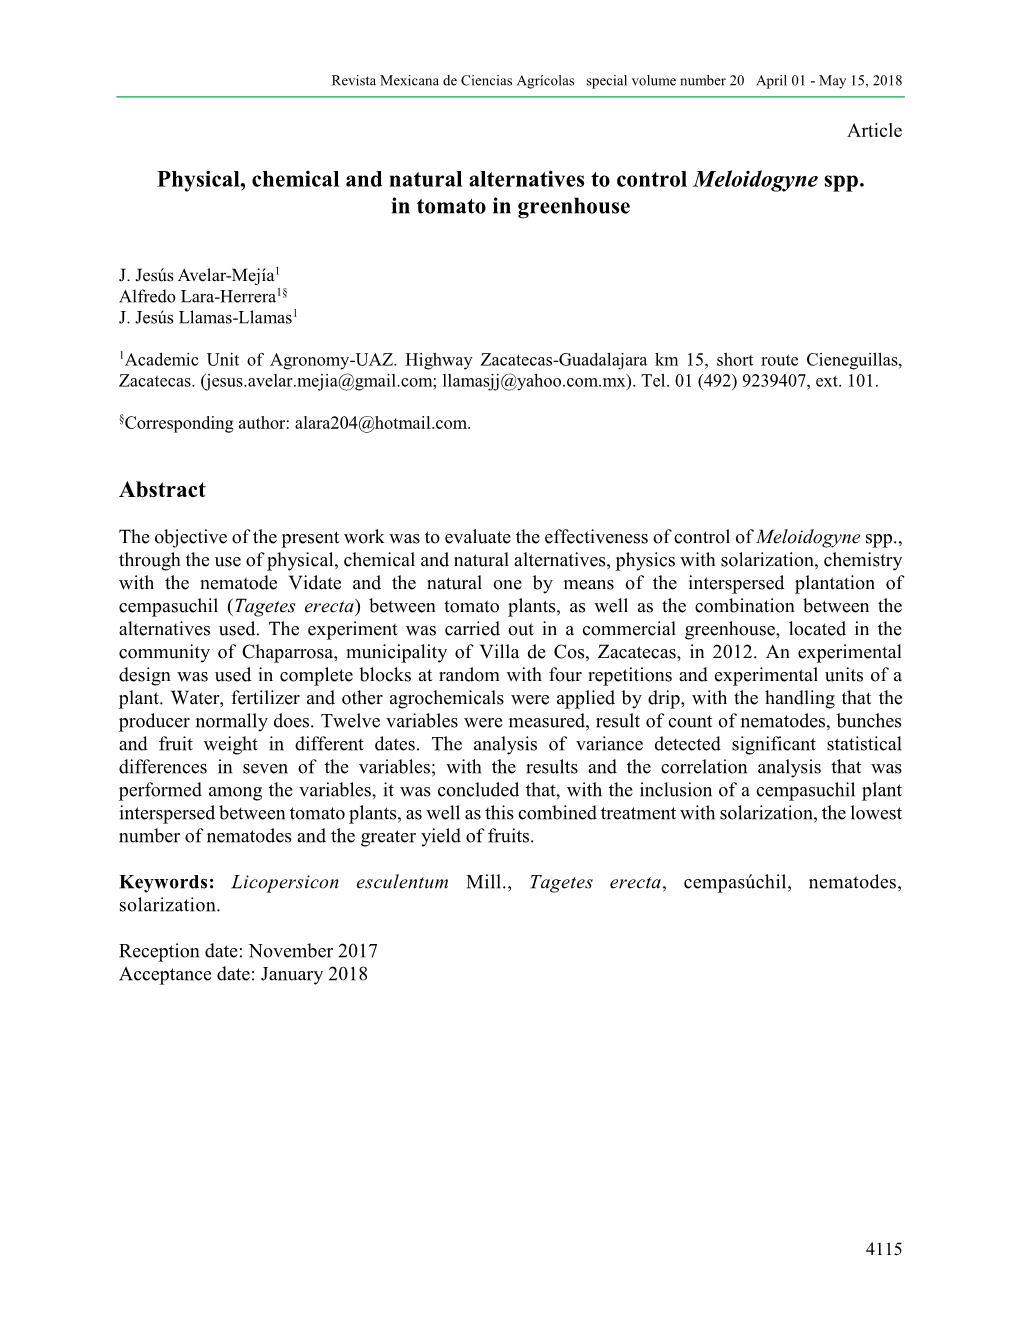 Physical, Chemical and Natural Alternatives to Control Meloidogyne Spp. in Tomato in Greenhouse Abstract